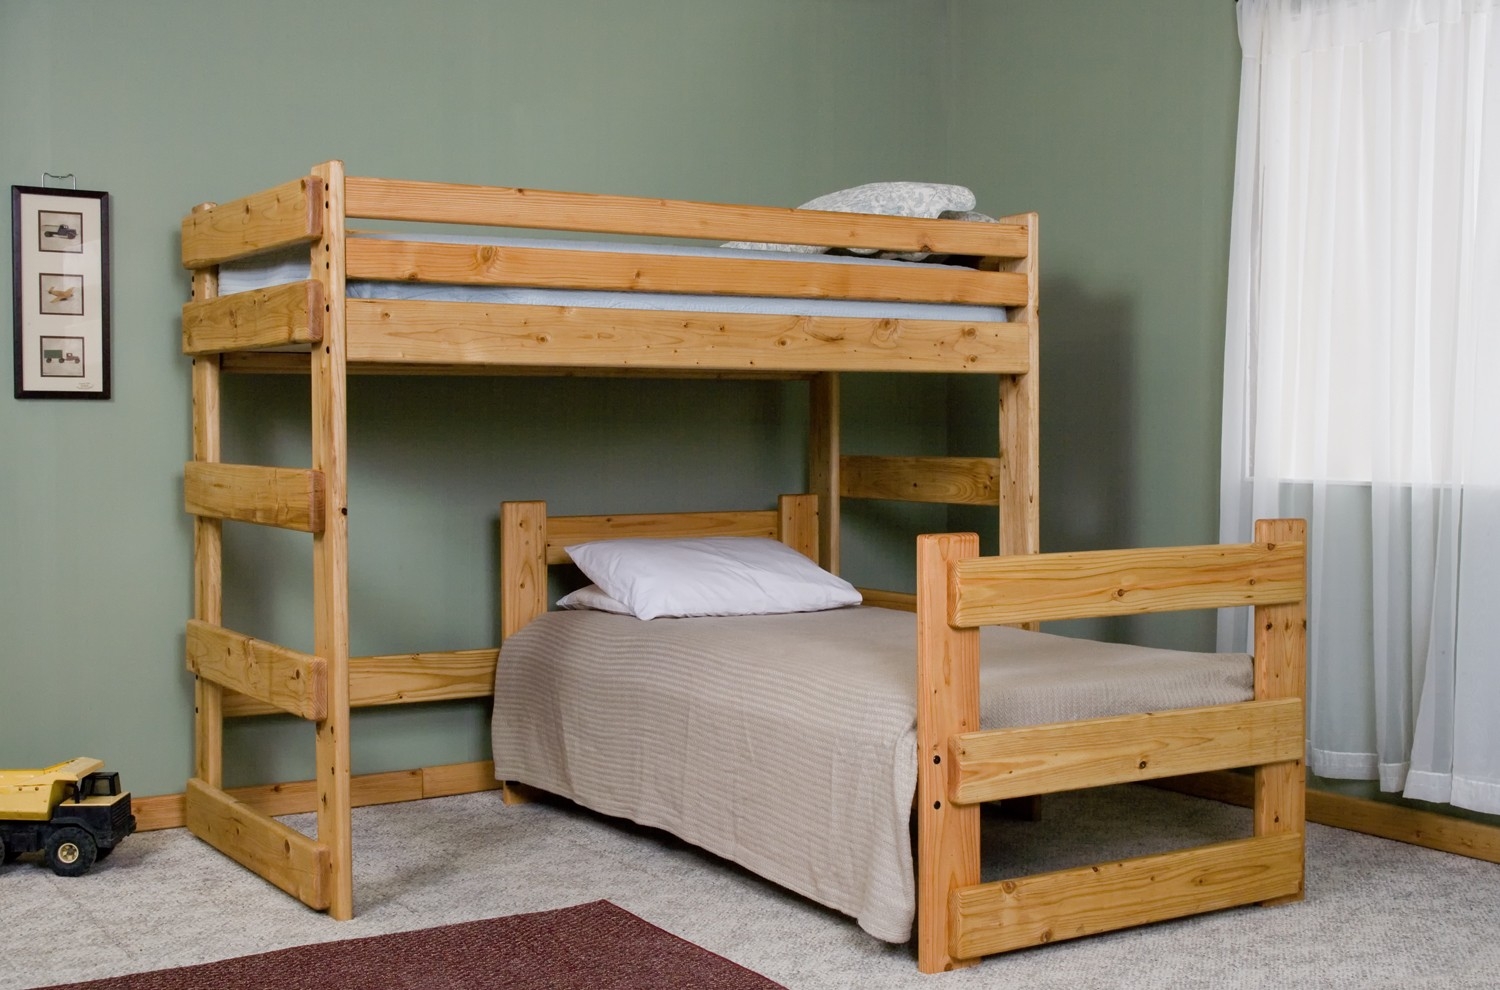 T shaped bunk beds